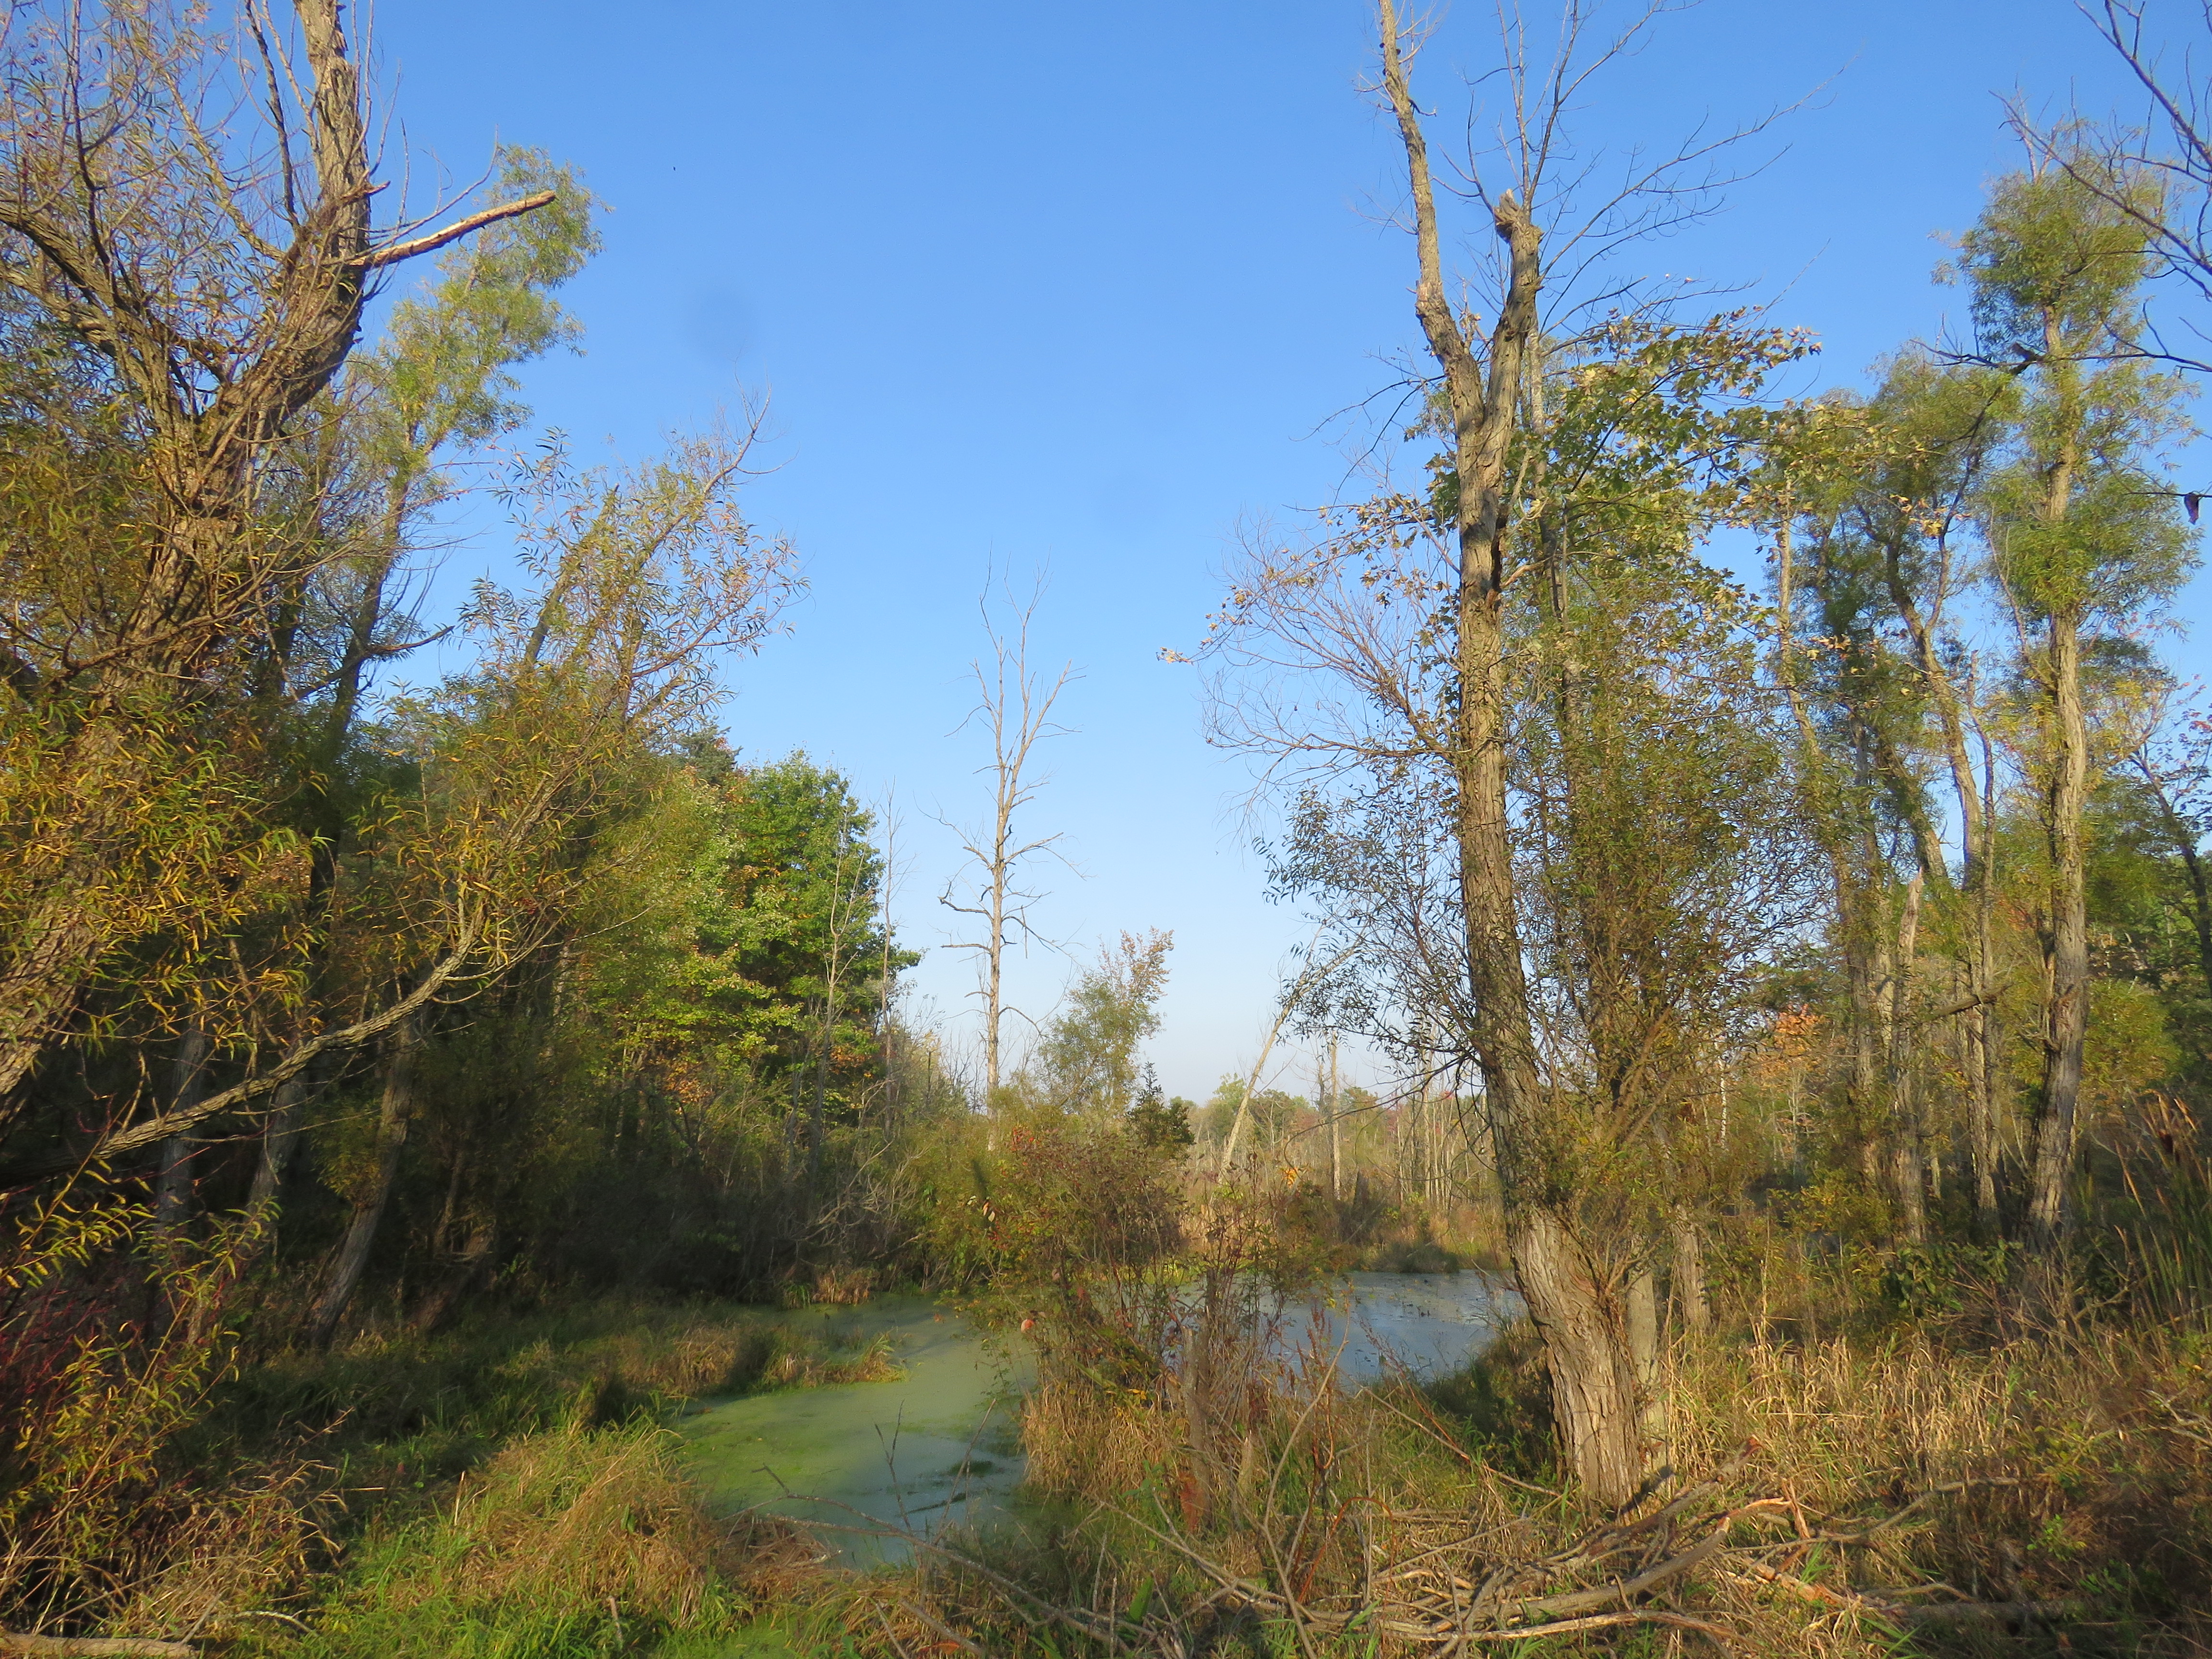 A photo taken from the edge of a swamp on a cloudless day. Tall trees surround the swamp. Foliage is just starting to turn from green to fall colors.